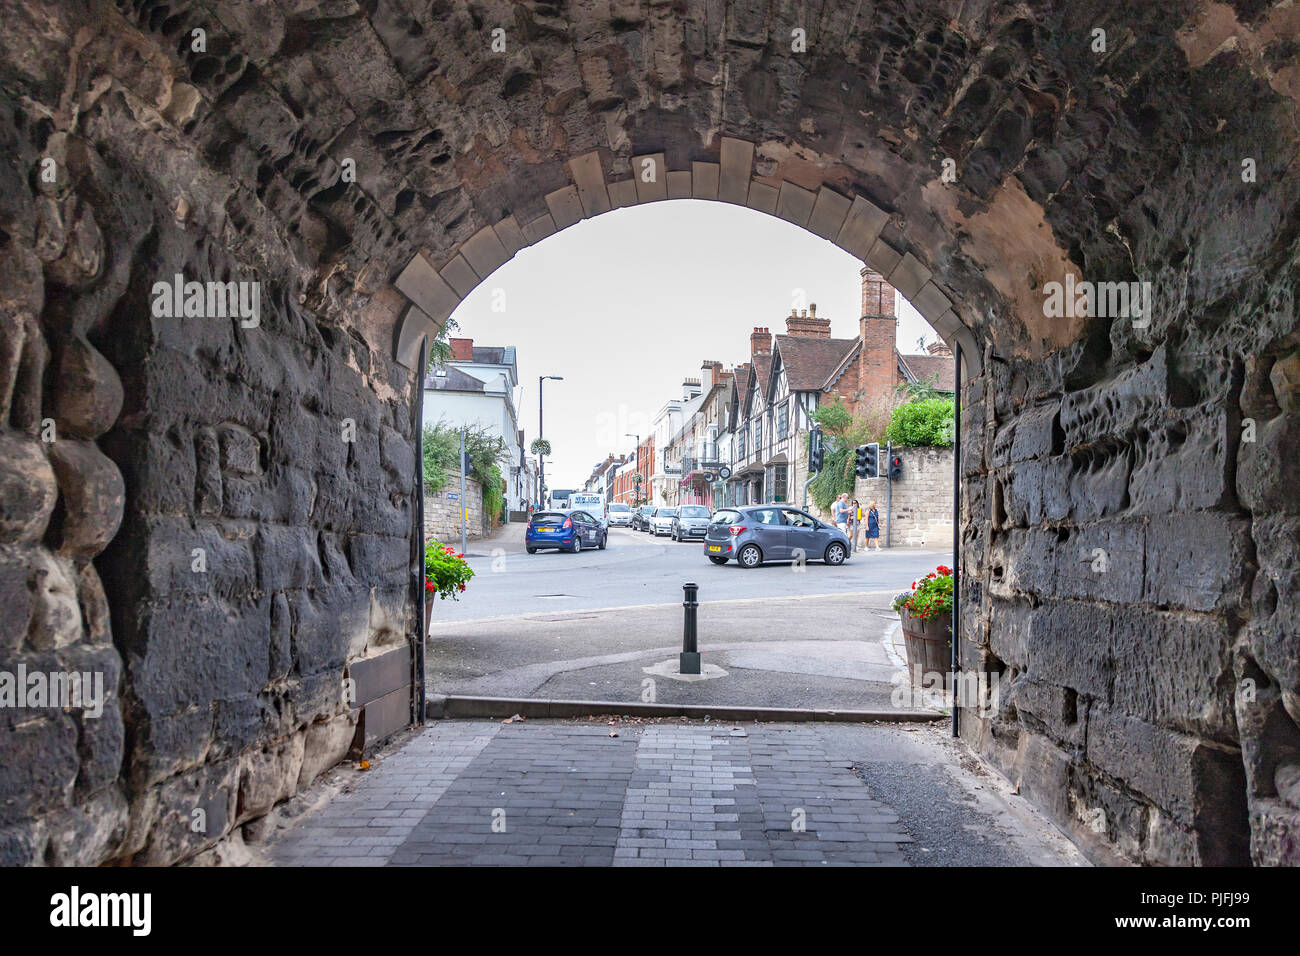 The Old city Wall and Gateway. Warwick a town on the River Avon, in England’s West Midlands region Stock Photo